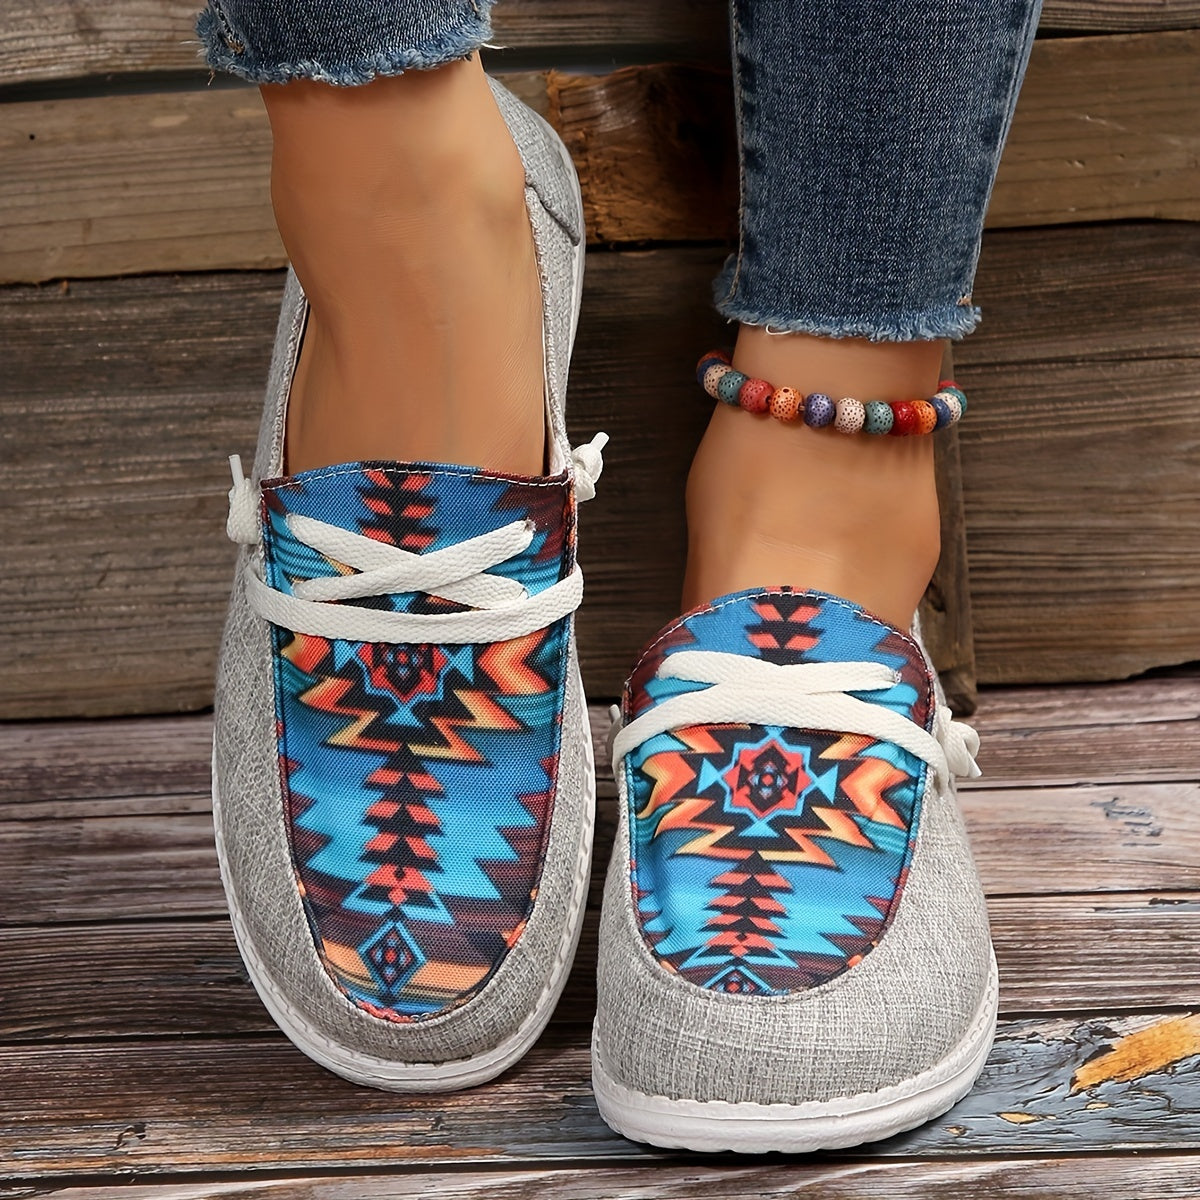 Women's Print Canvas Shoes, Lightweight Low Top Slip On Flat Shoes, Casual Walking Sneakers